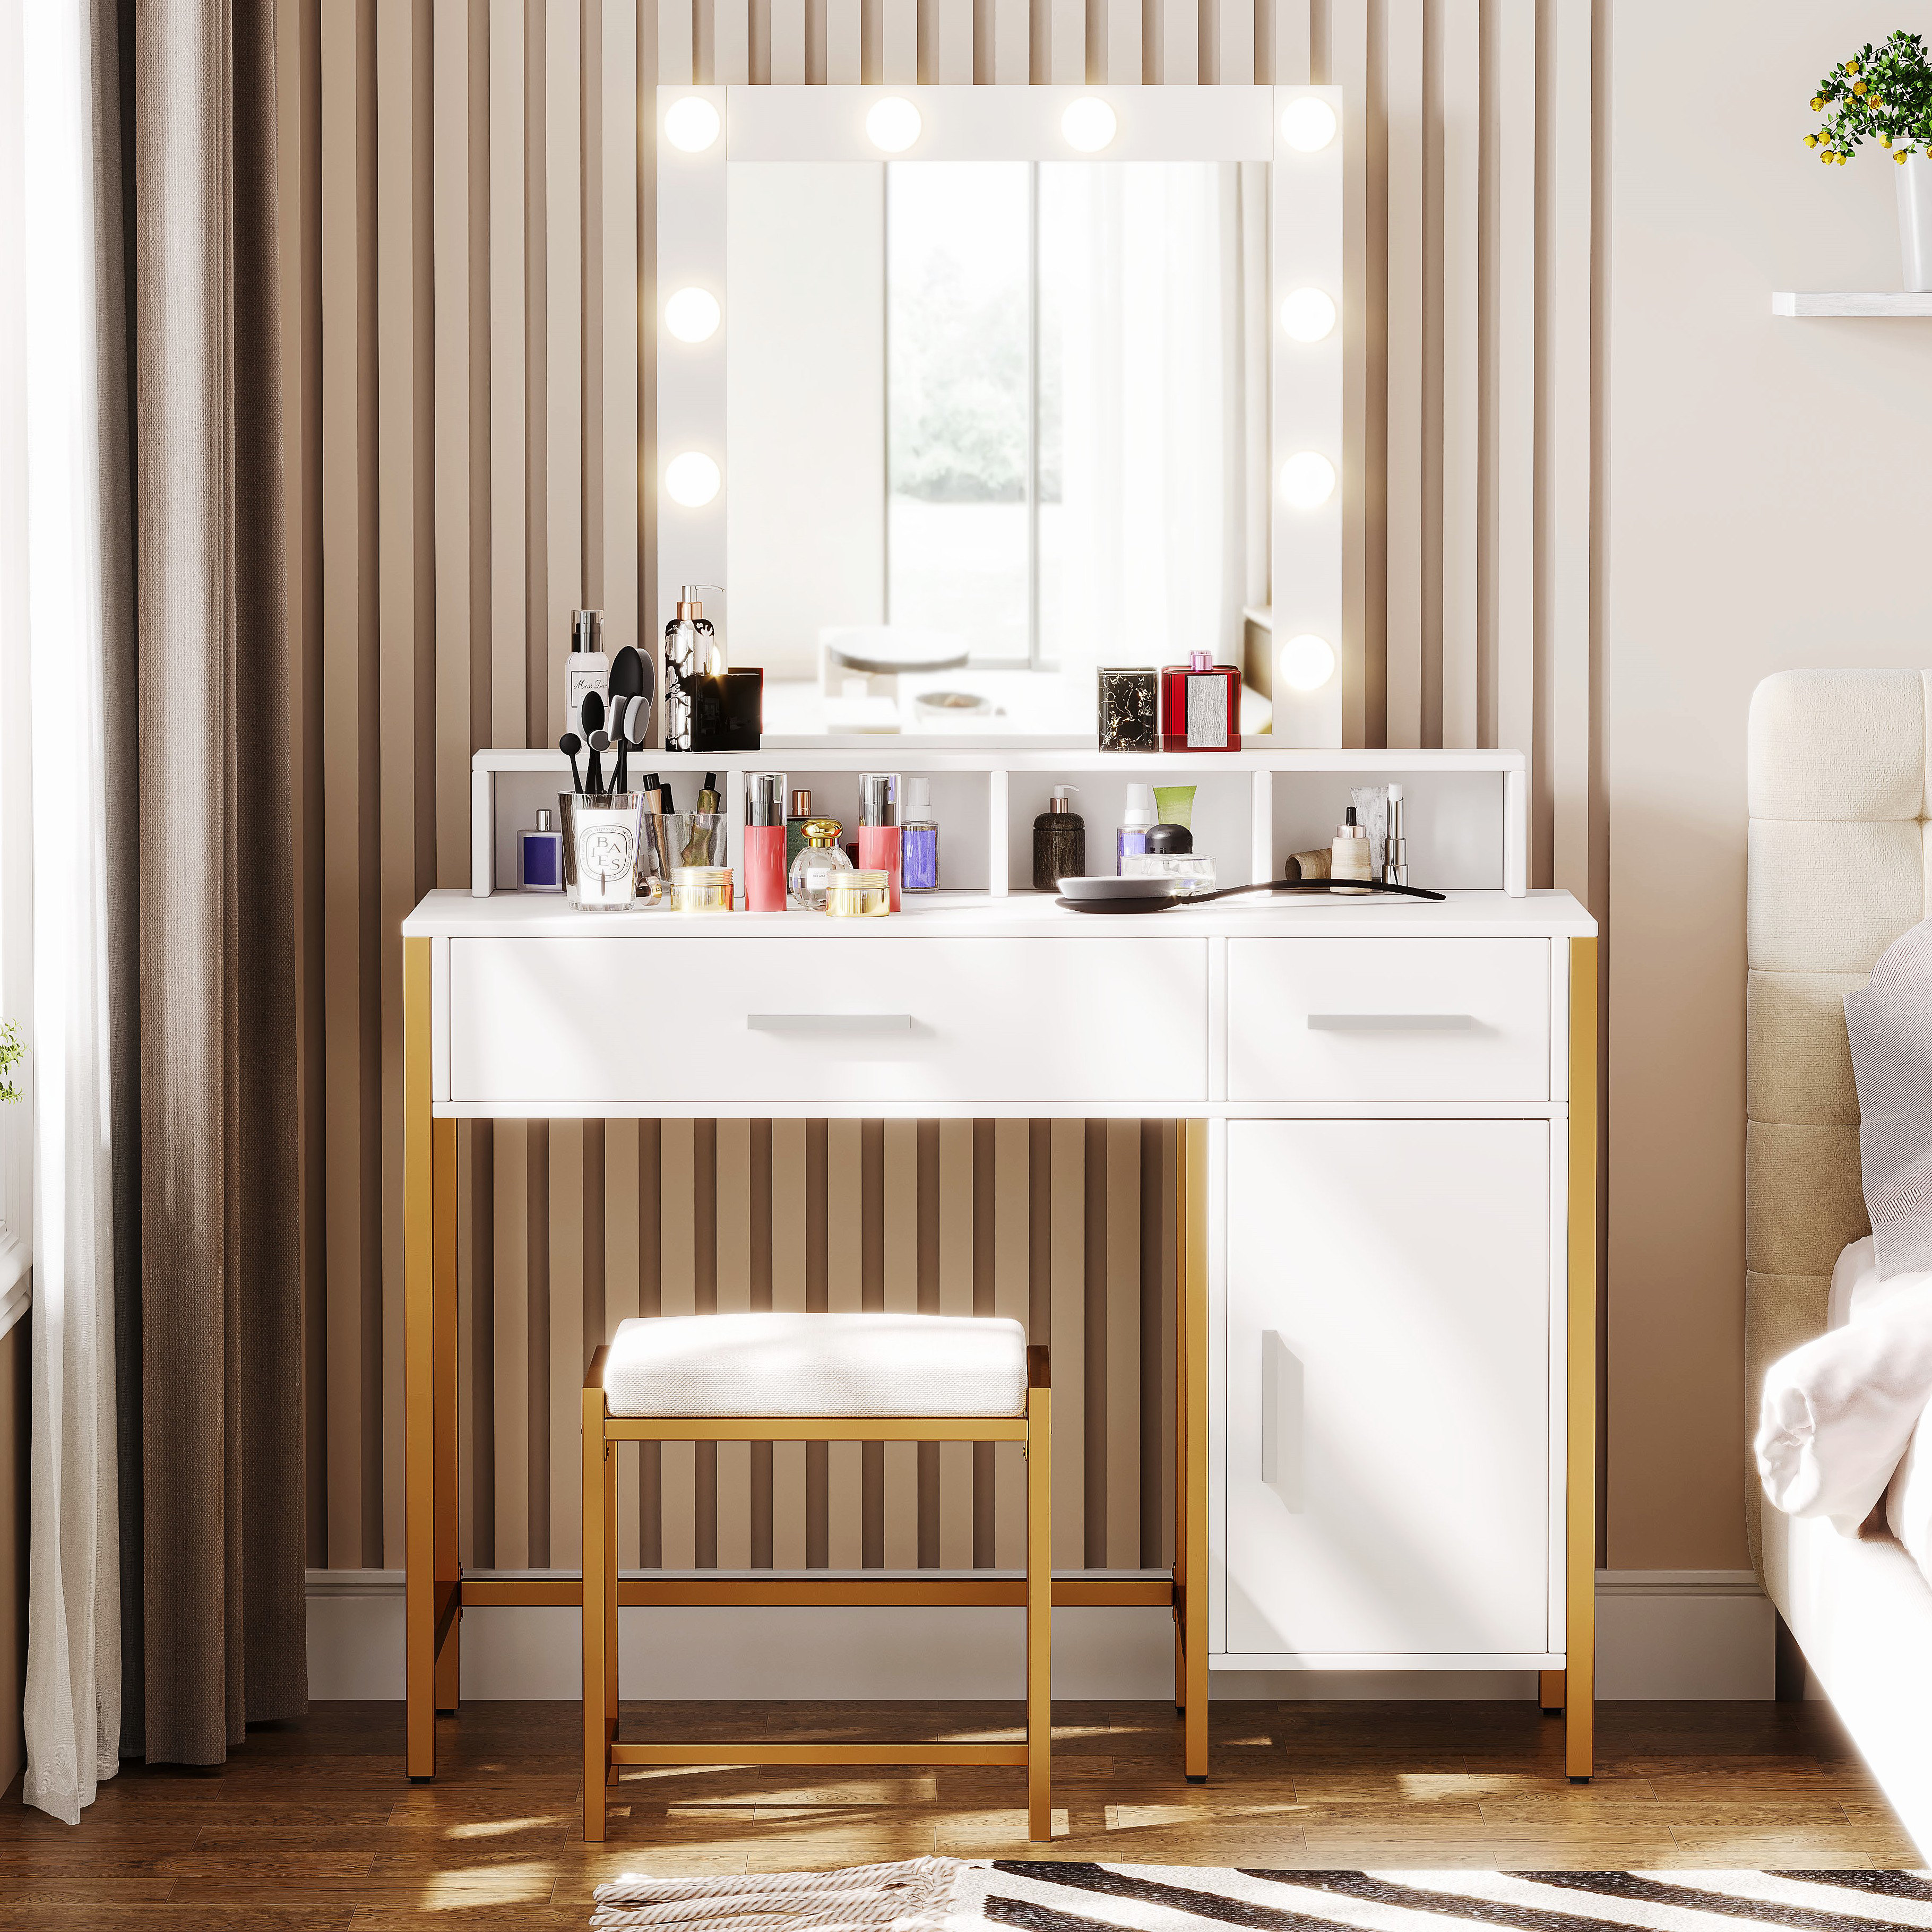 Dressing Cabinets: Buy Dressing Mirror Cabinets Online | Pepperfry